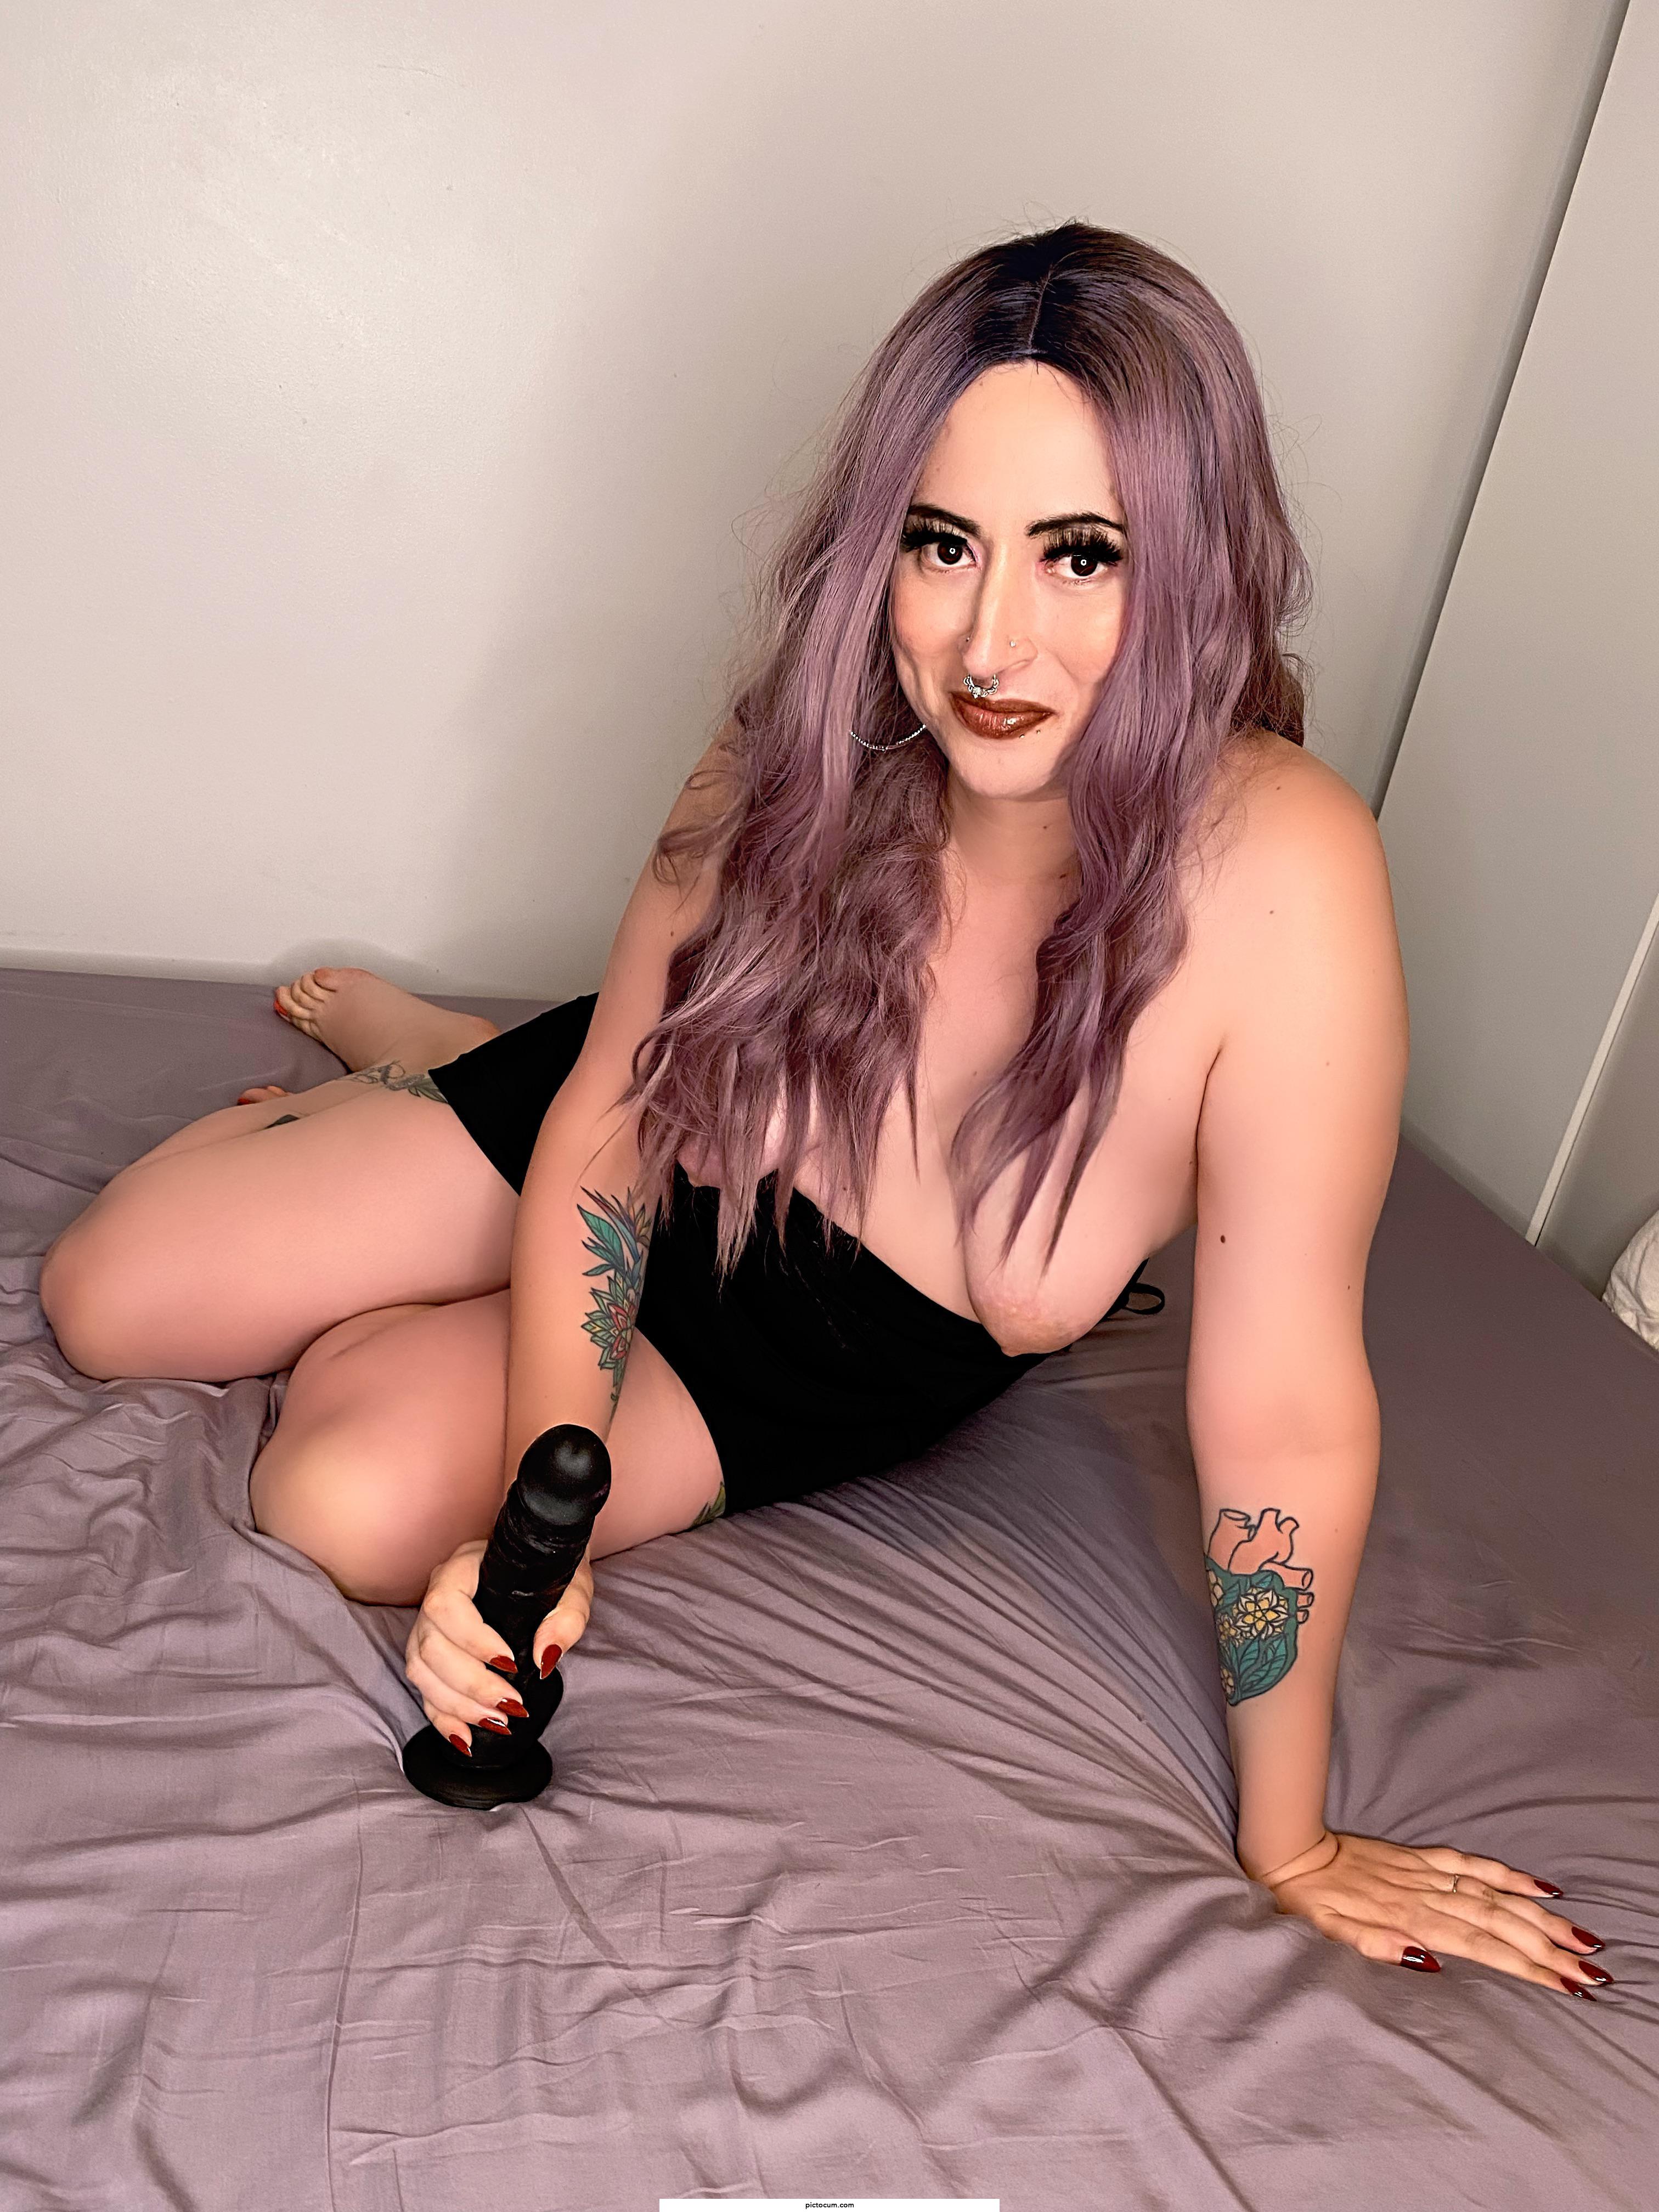 Your sexy hot amazon is horny as fuck!!!